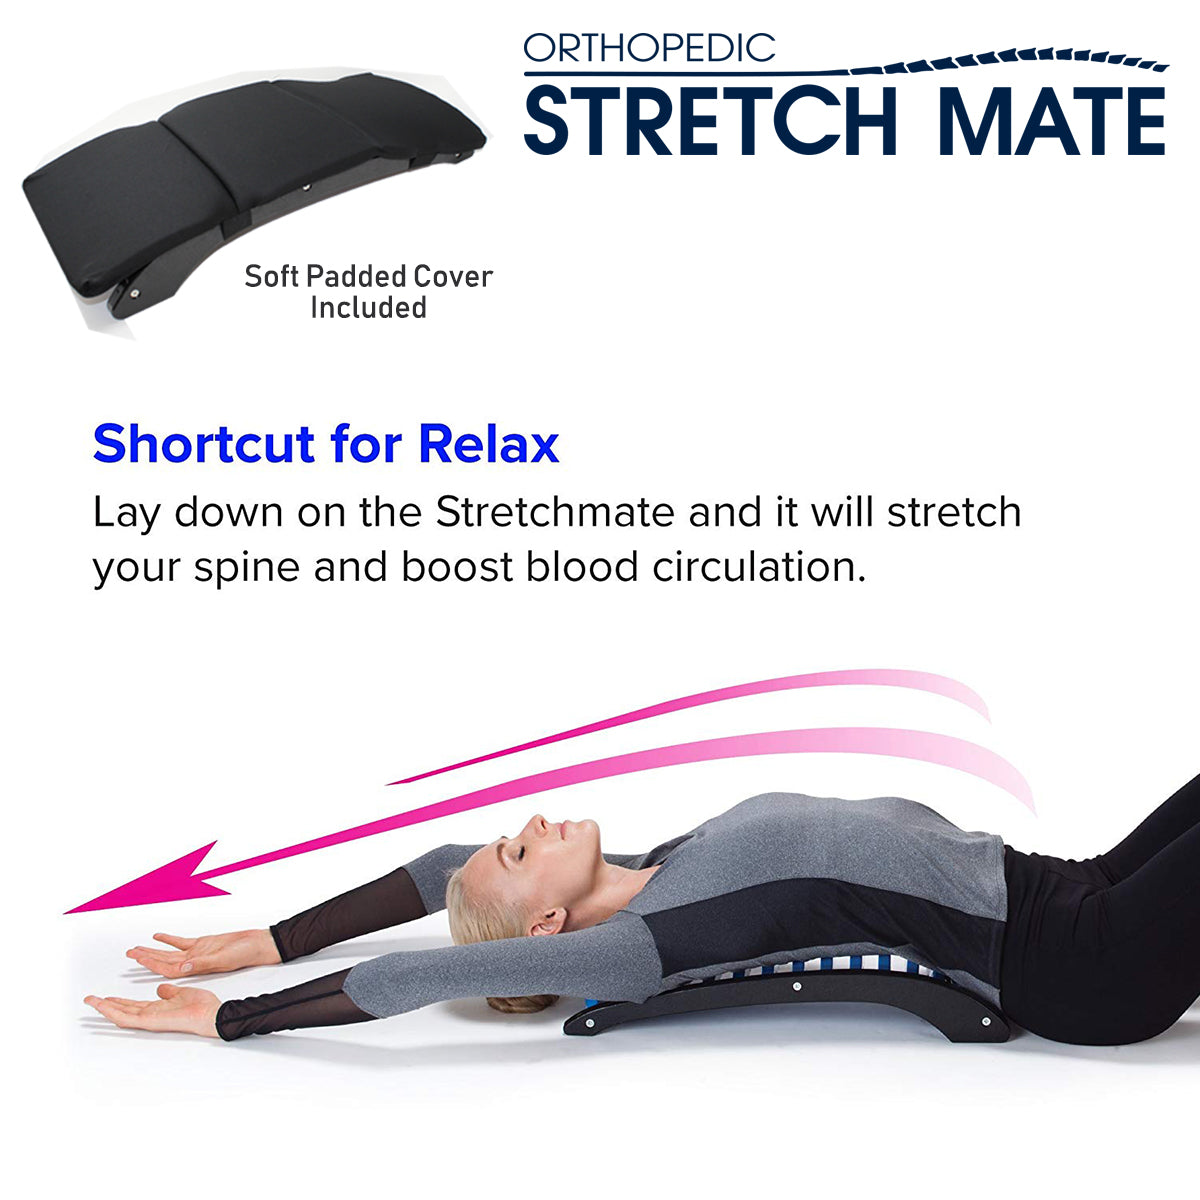 Daiwa Felicity Orthopedic Back Stretching Support Stretch Mate for Back and Sciatica Pain with Pad